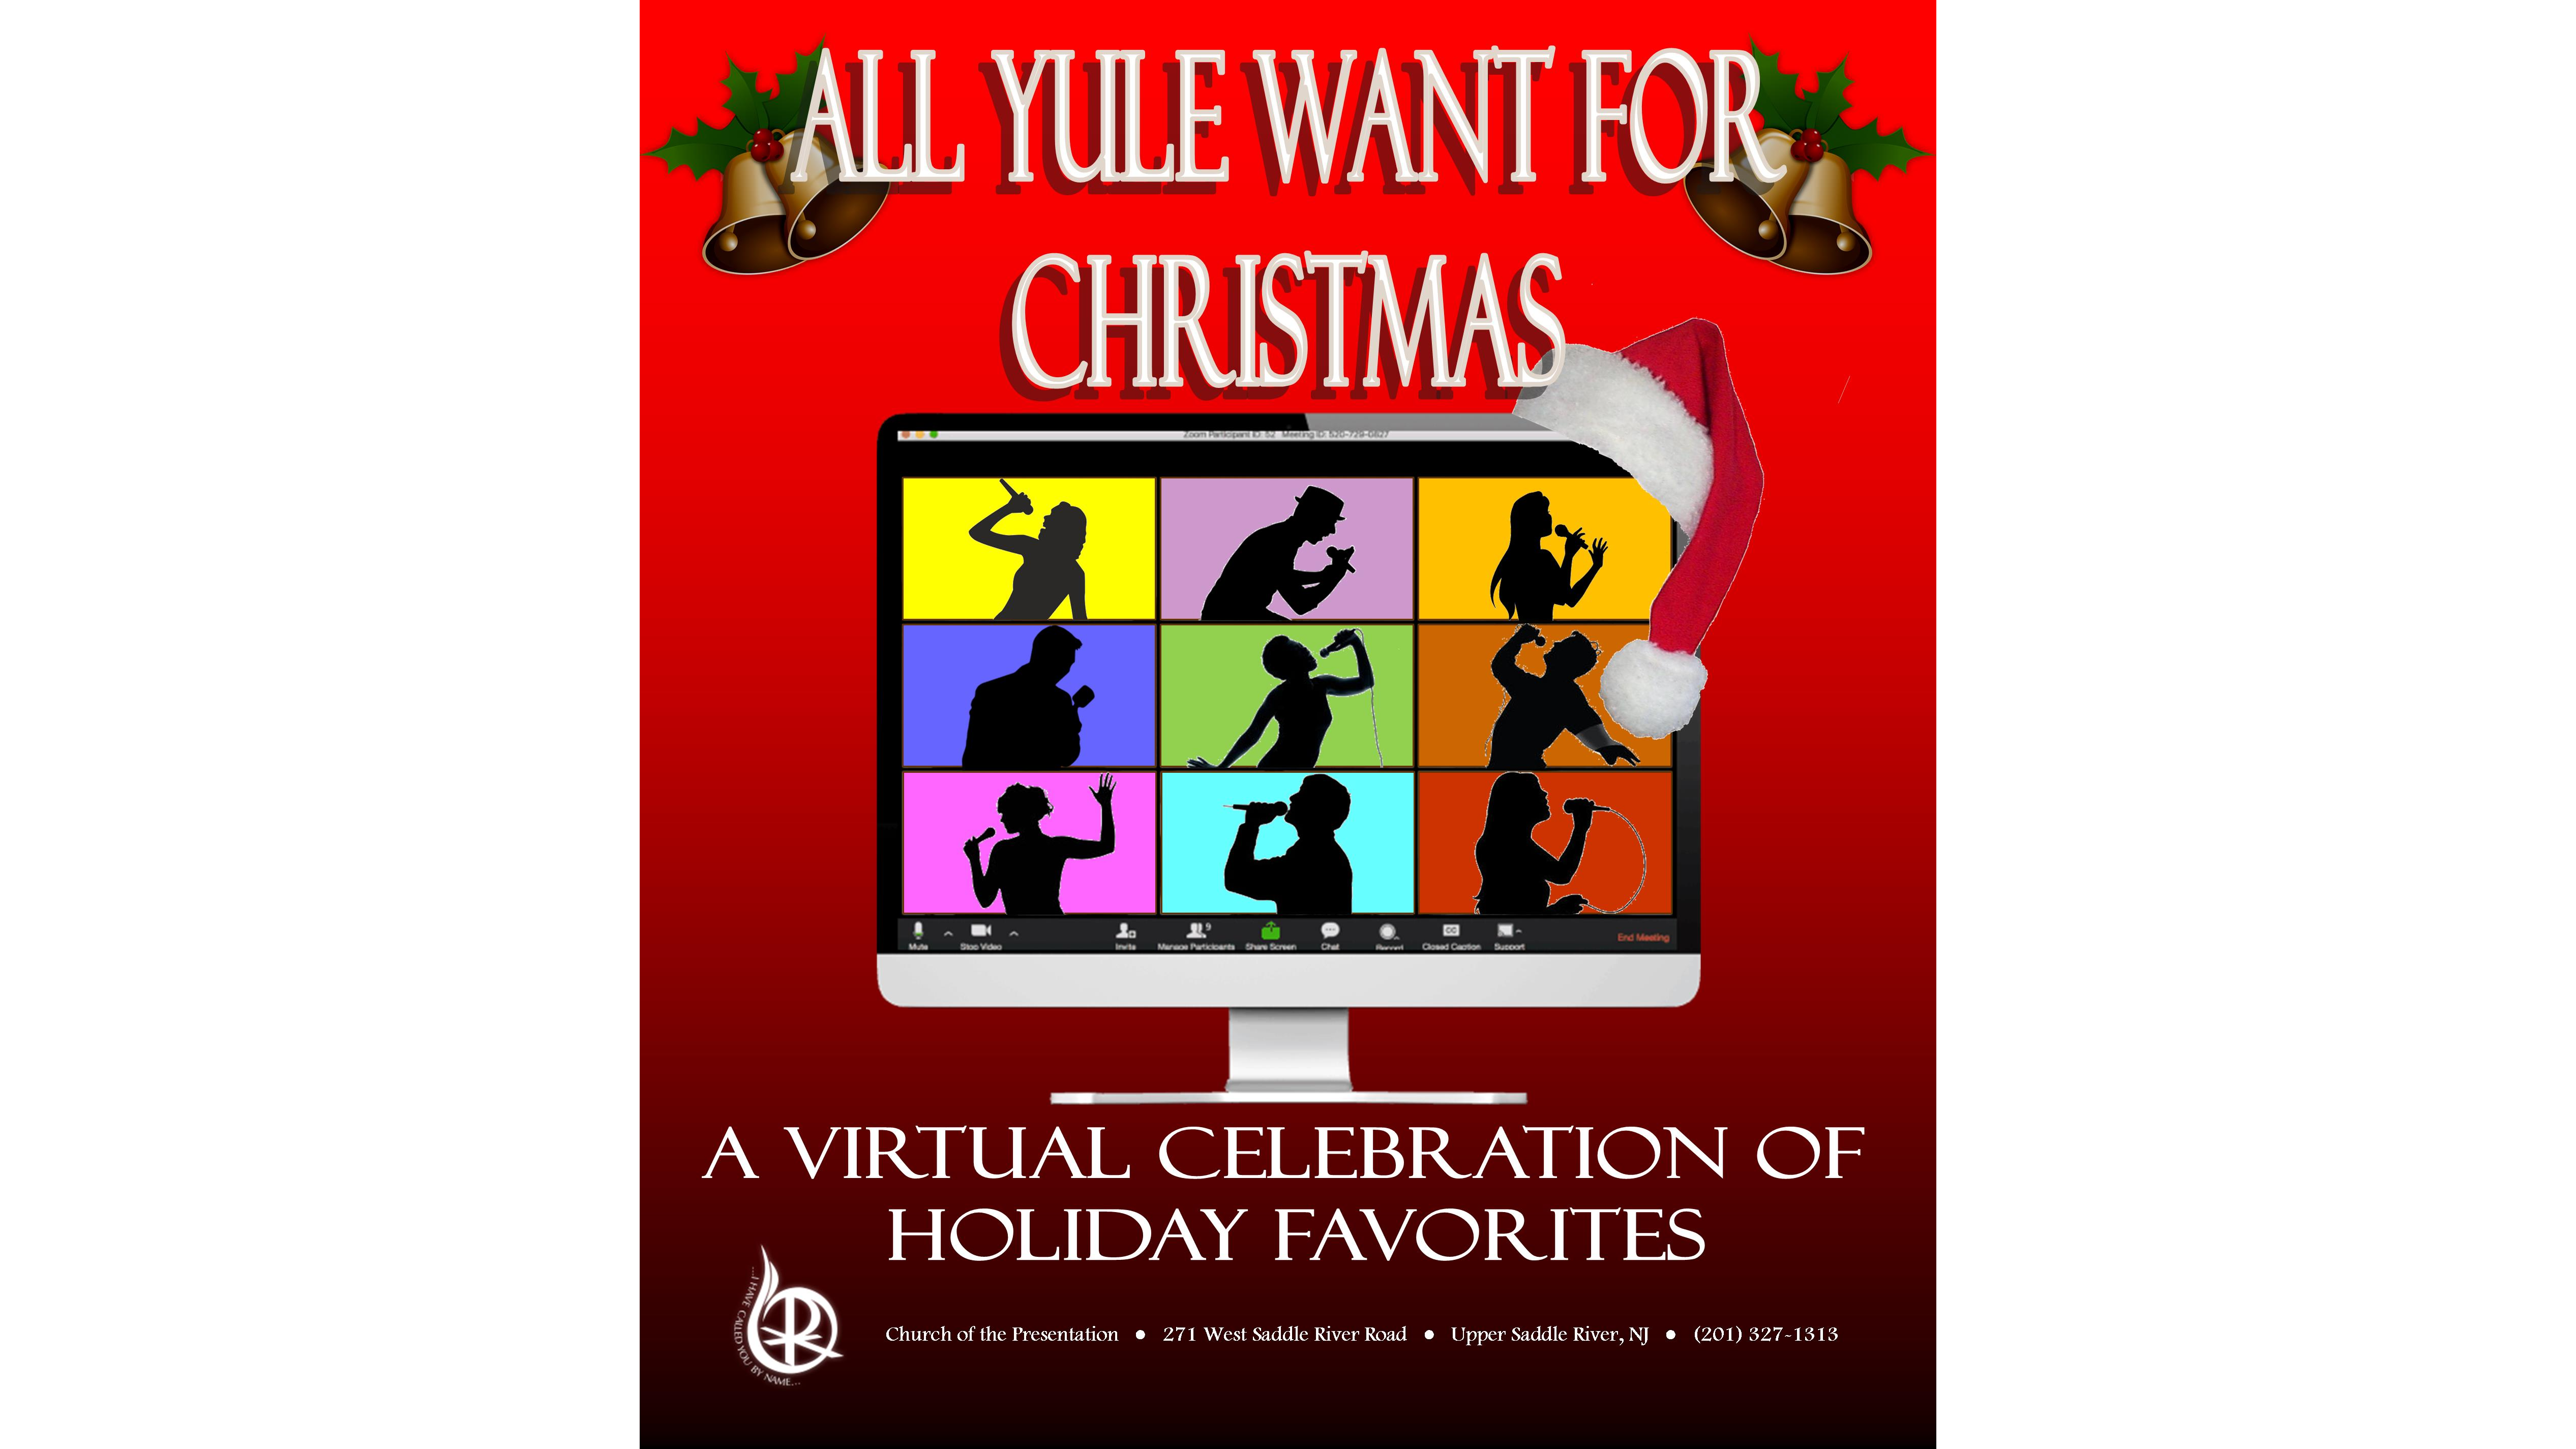 Photo for Christmas Concert 2020: All Yule Want For Christmas on ViewStub